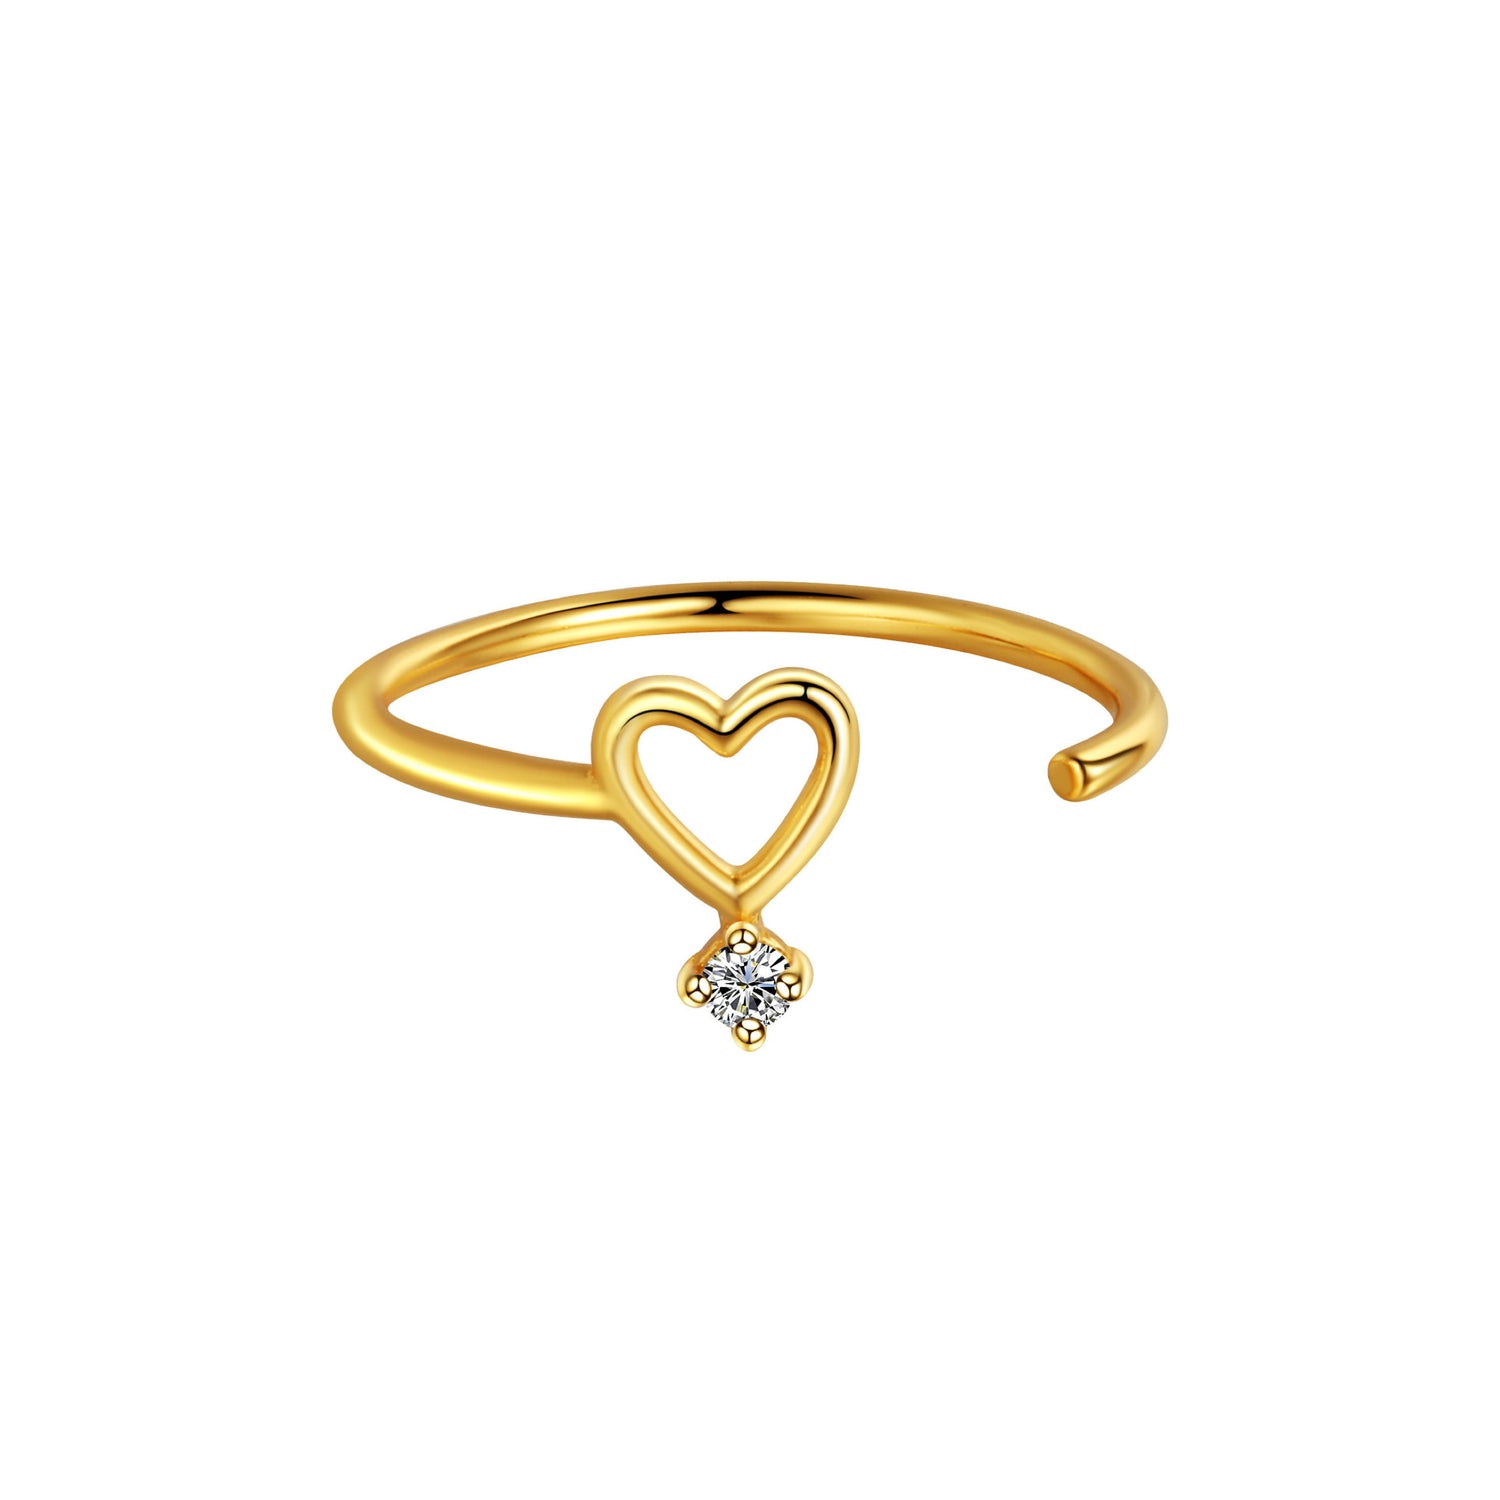 Darla Heart Ring | 18k Gold Plated